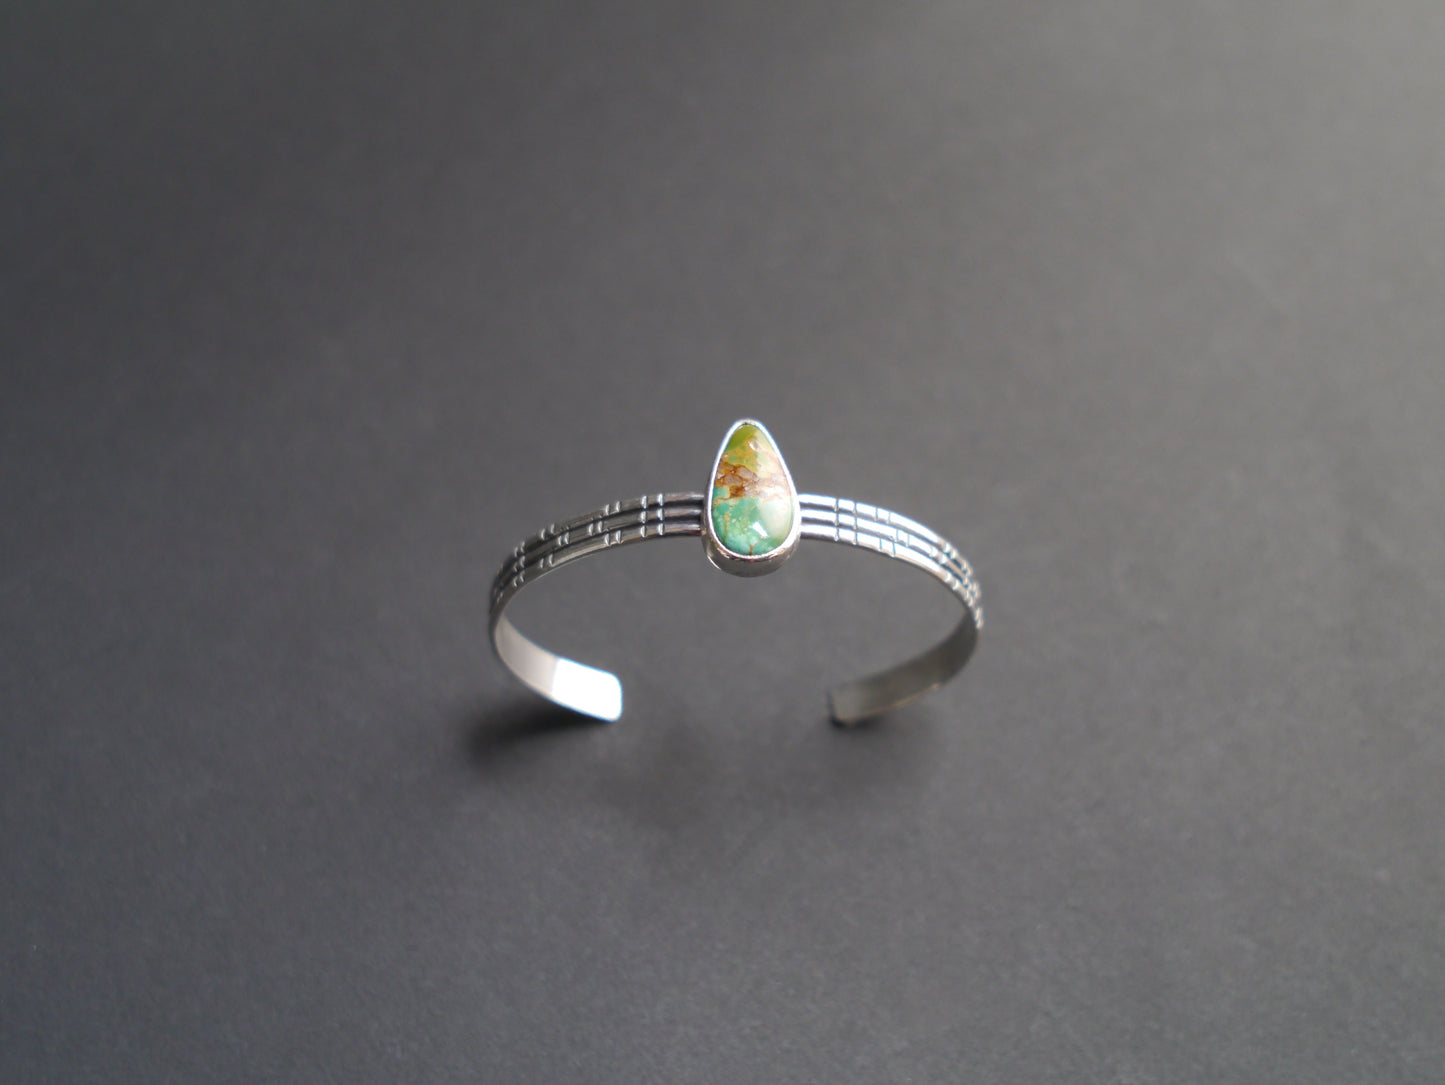 Turquoise Cuff Bracelet in Sterling Silver (3)